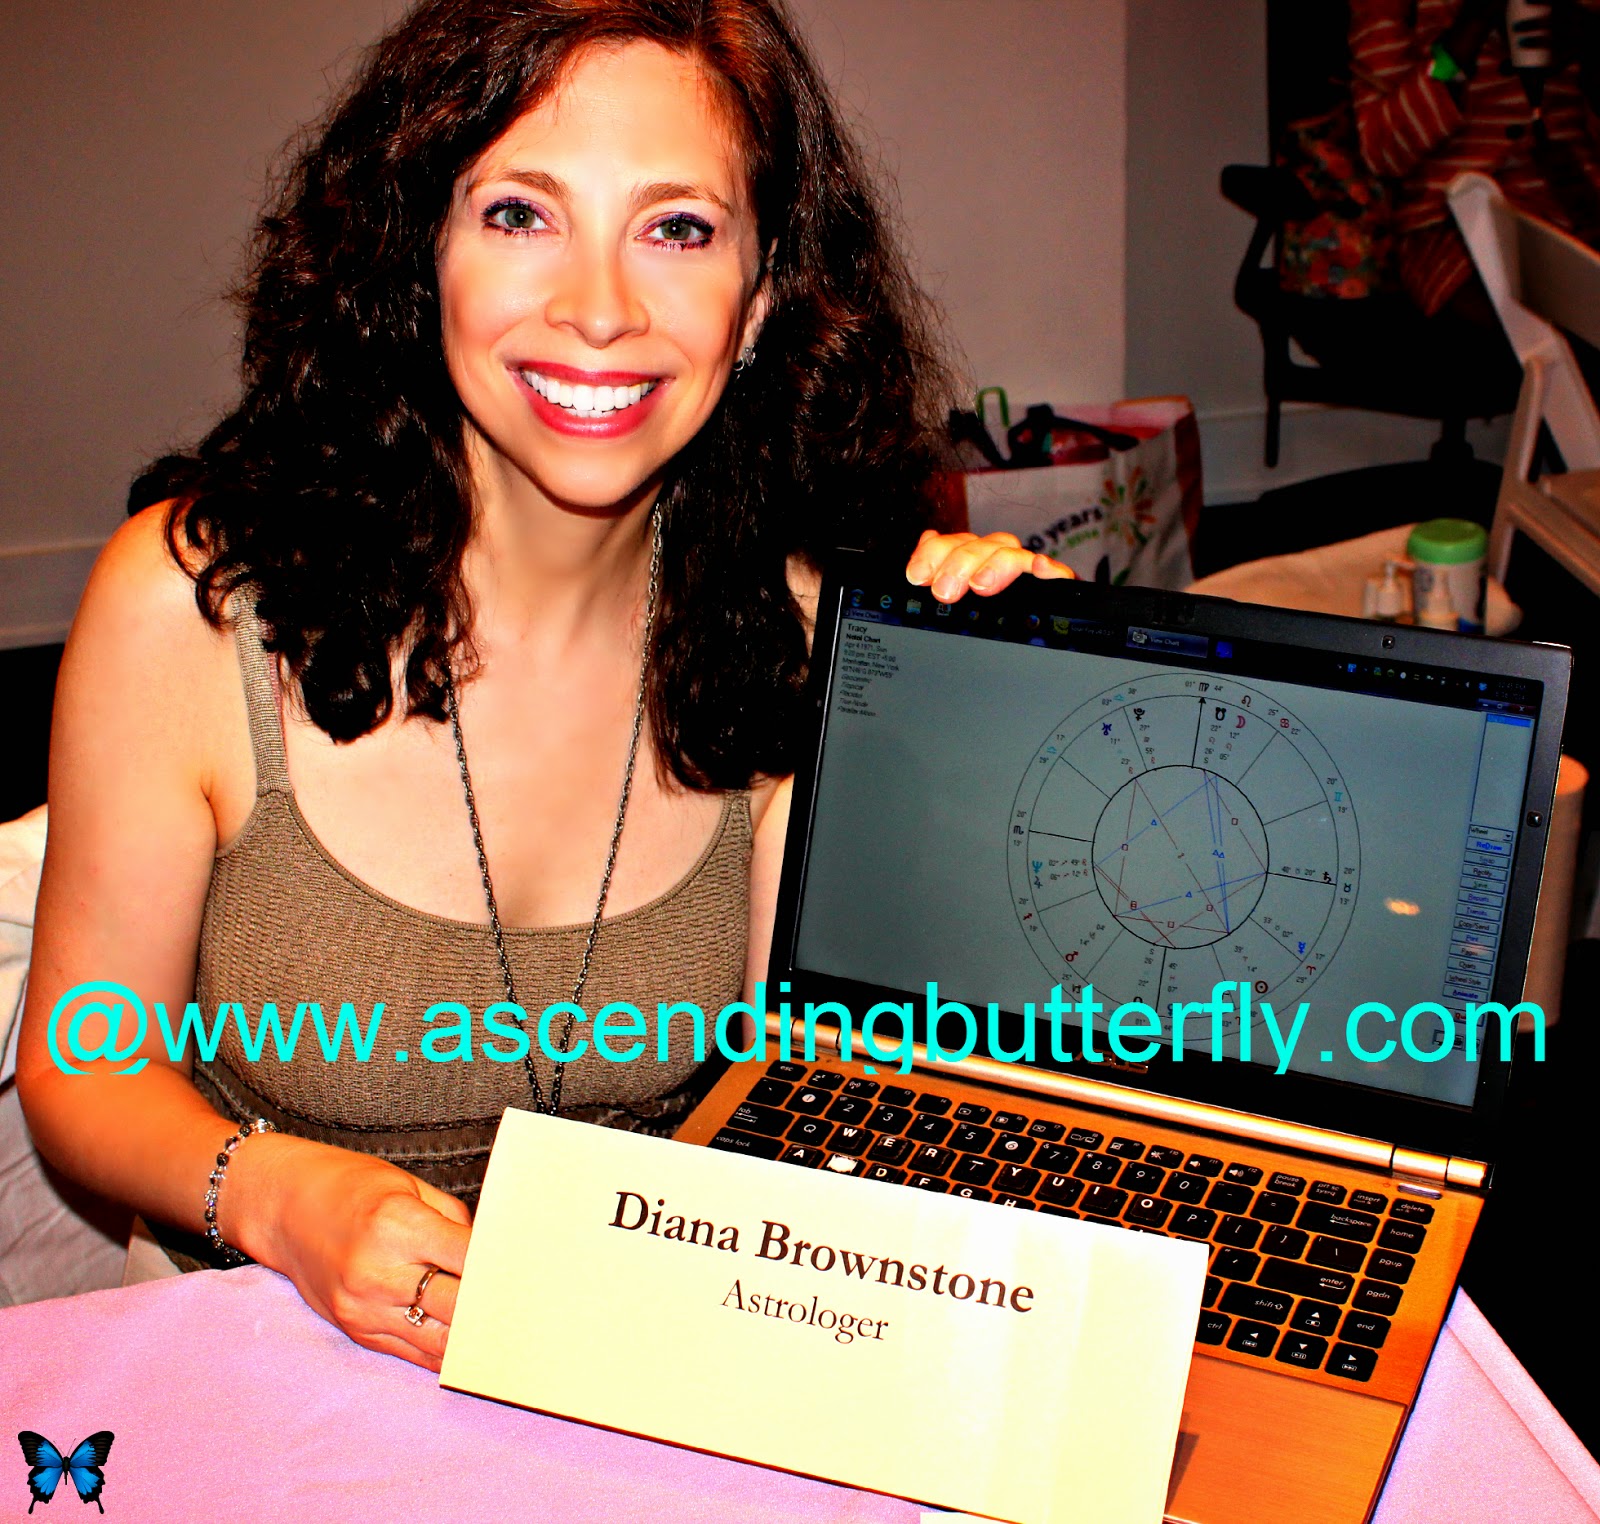 Astrologer Diana Brownstone at Getting Gorgeous 2014